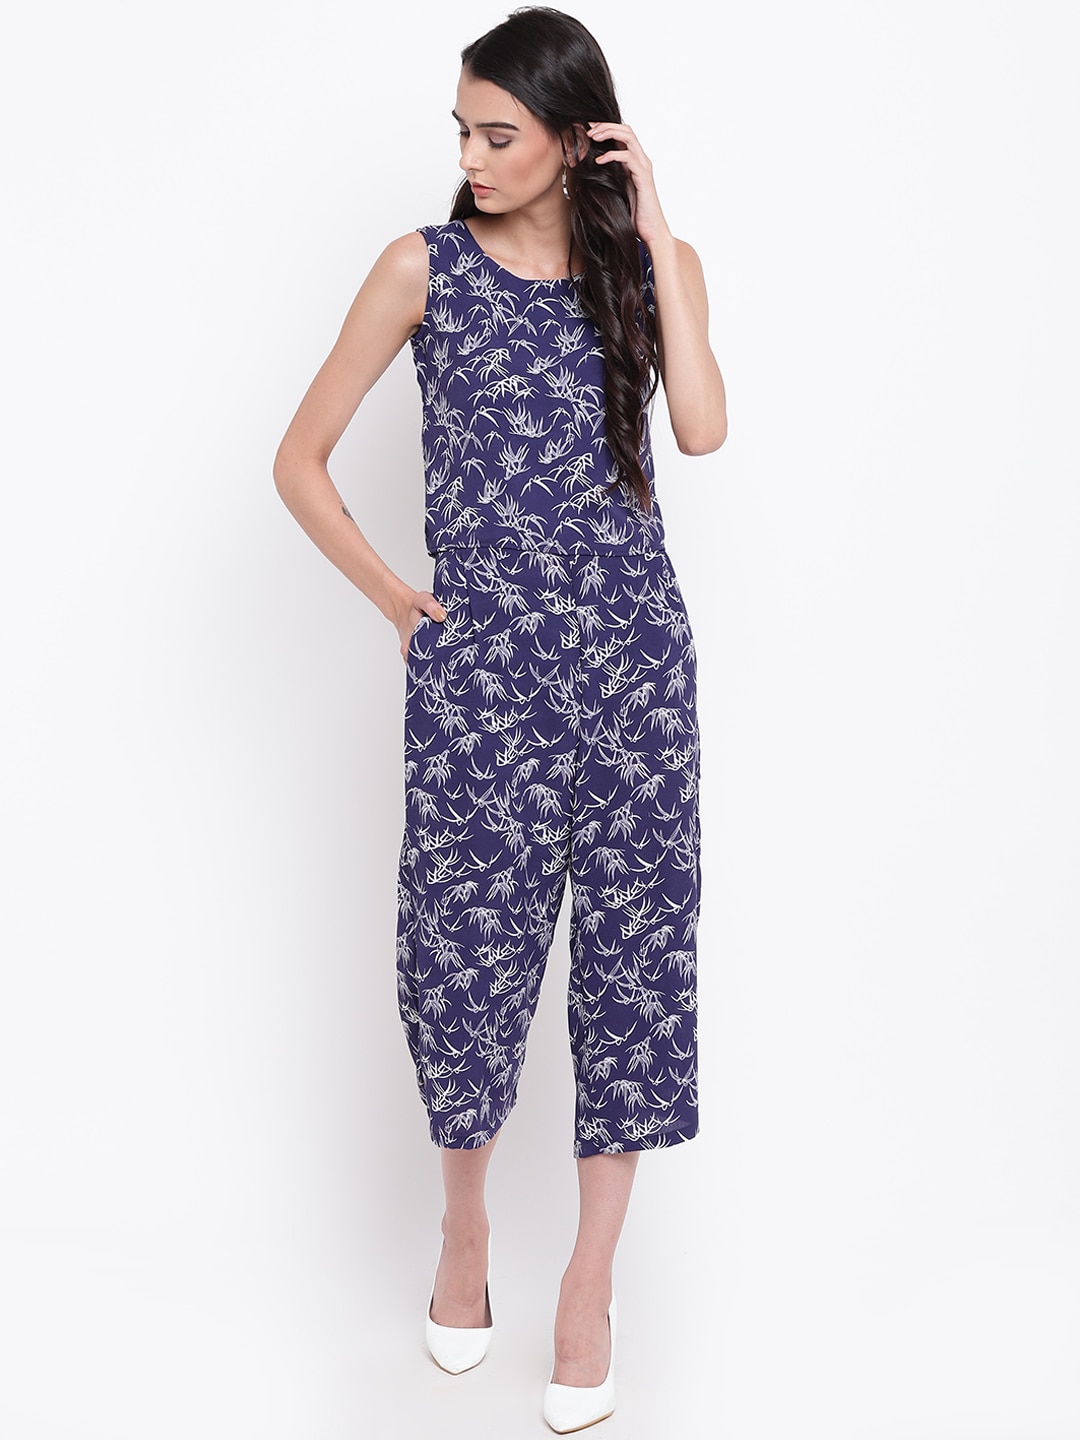 Belle Fille Navy Blue & White Printed Layered Capri Jumpsuit Price in India